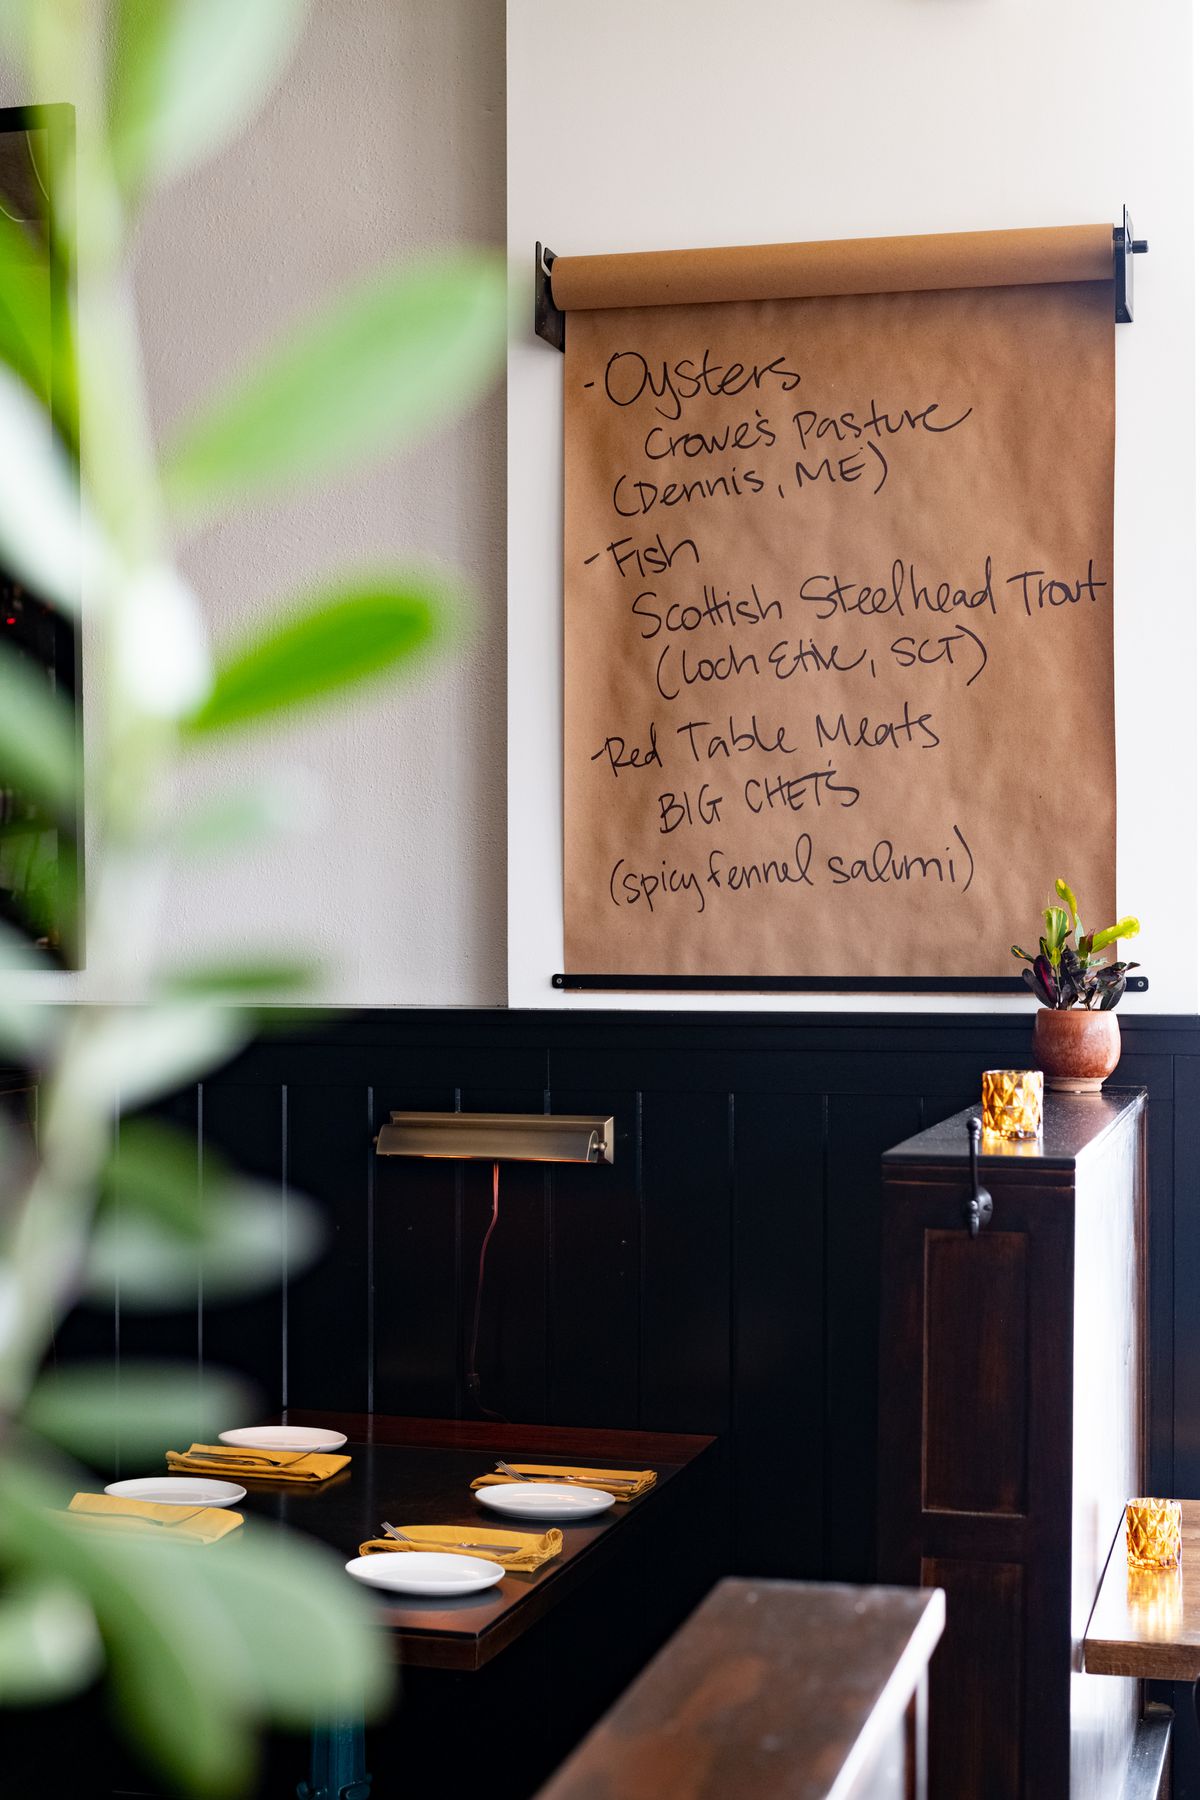 A dark brown wood booth set for four with bright, mustard-colored cloth napkins. Above it is a butcher paper specials listing the variety of mussels, fish, and salumi offered that day.